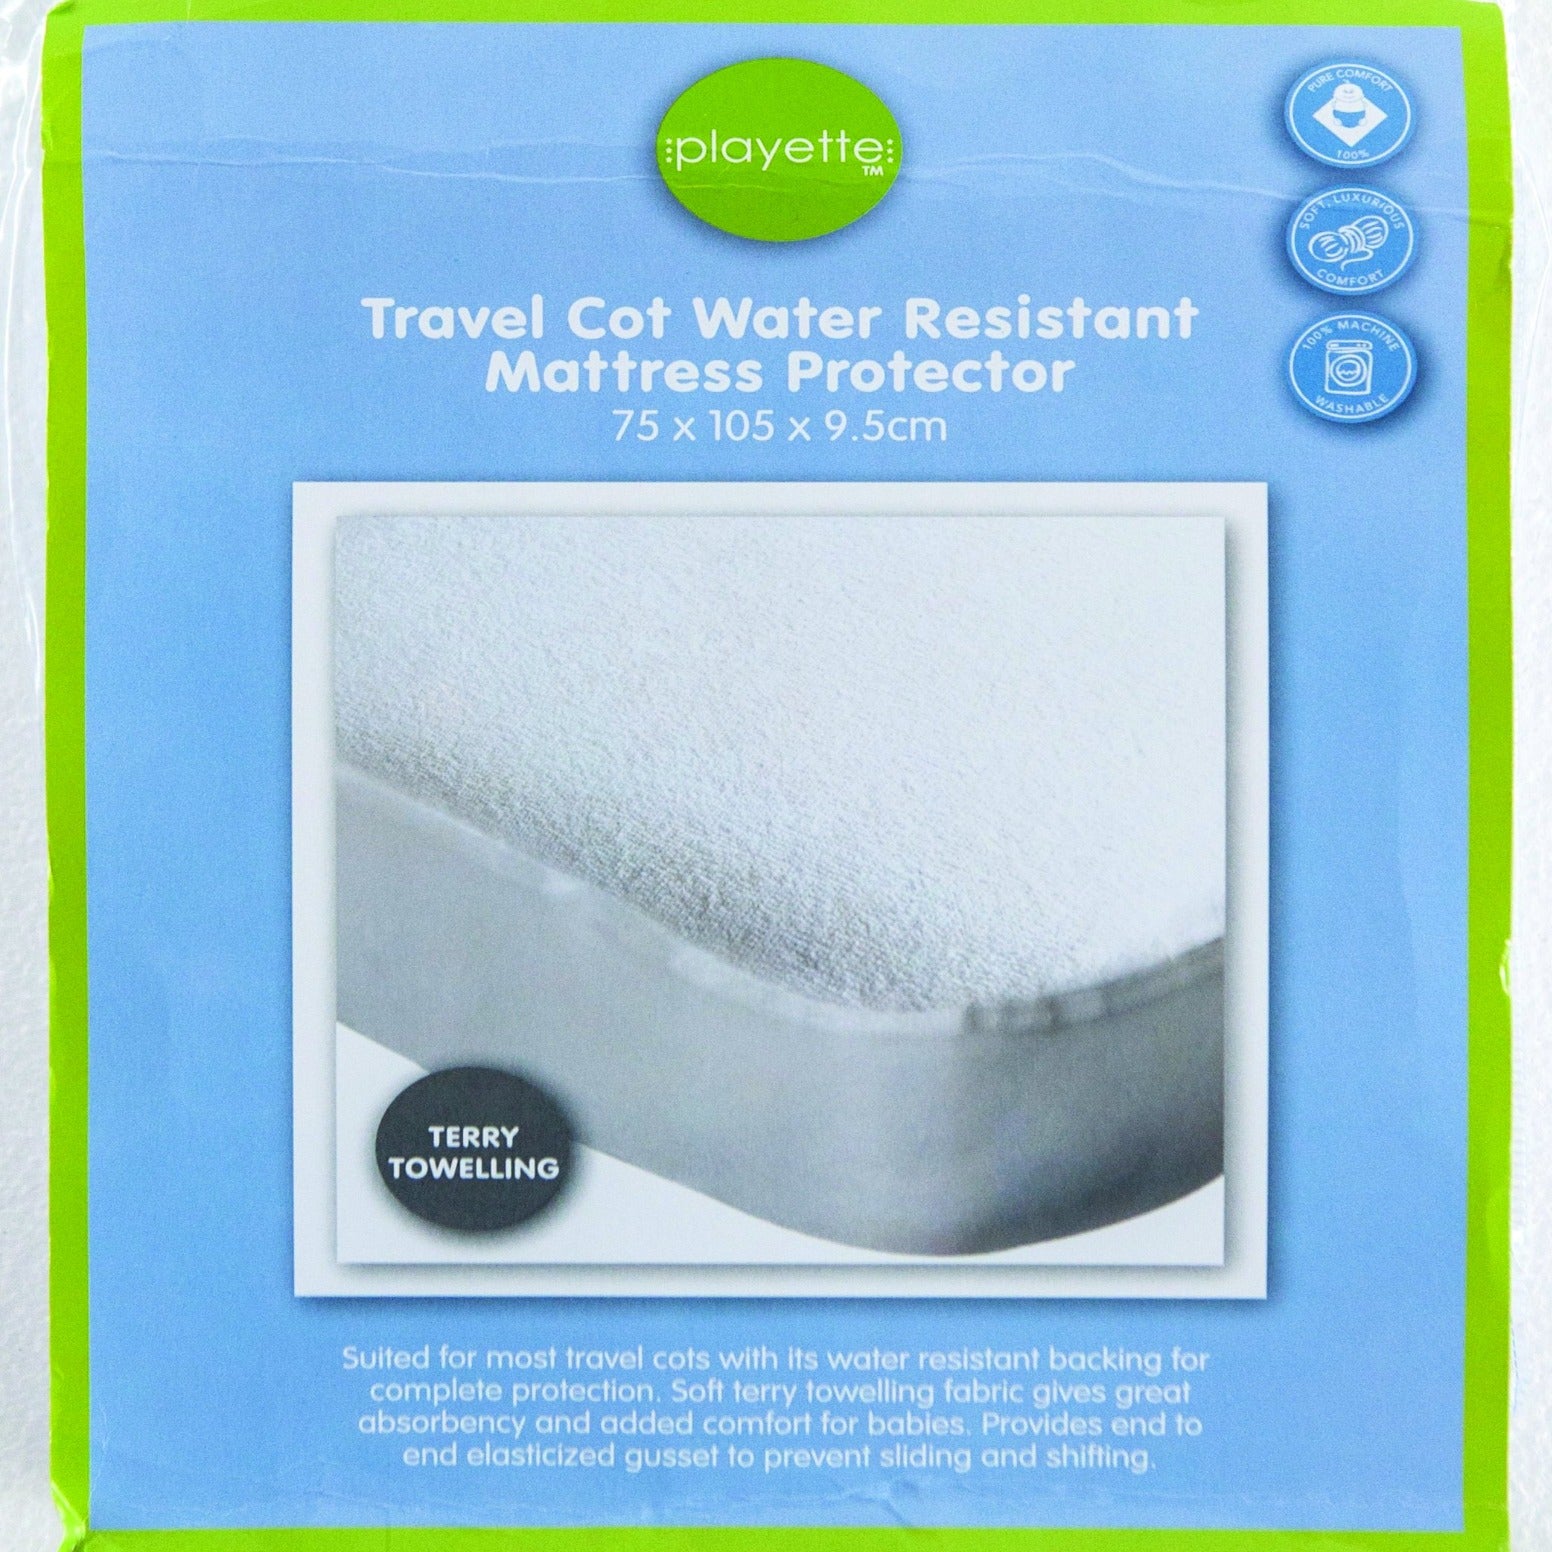 Playette Embossed Water Resistant Travel Cot Mattress Protector